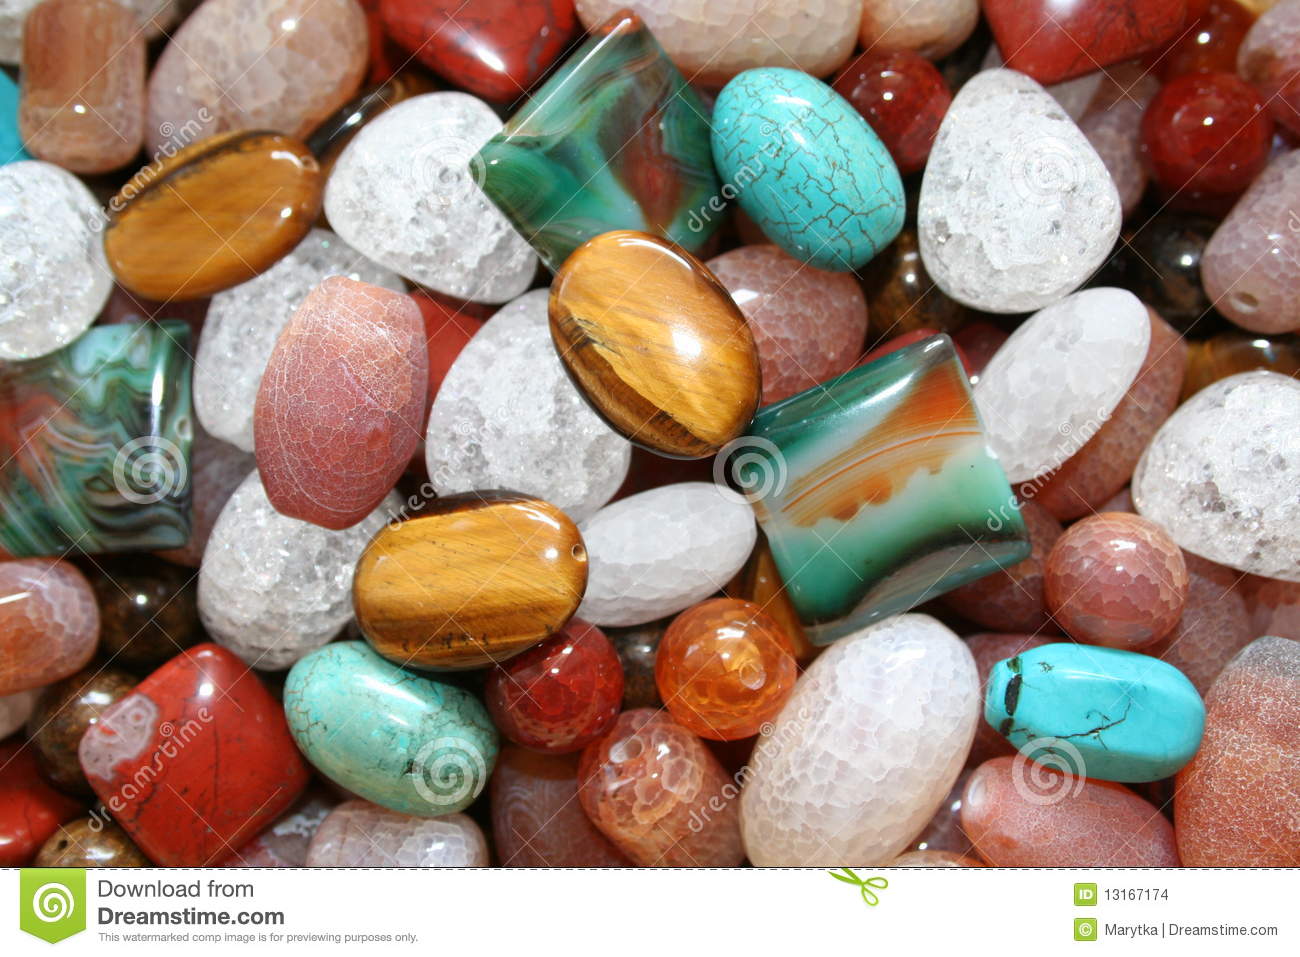 Manufacturers Exporters and Wholesale Suppliers of Natural Stones Jabalpur Madhya Pradesh